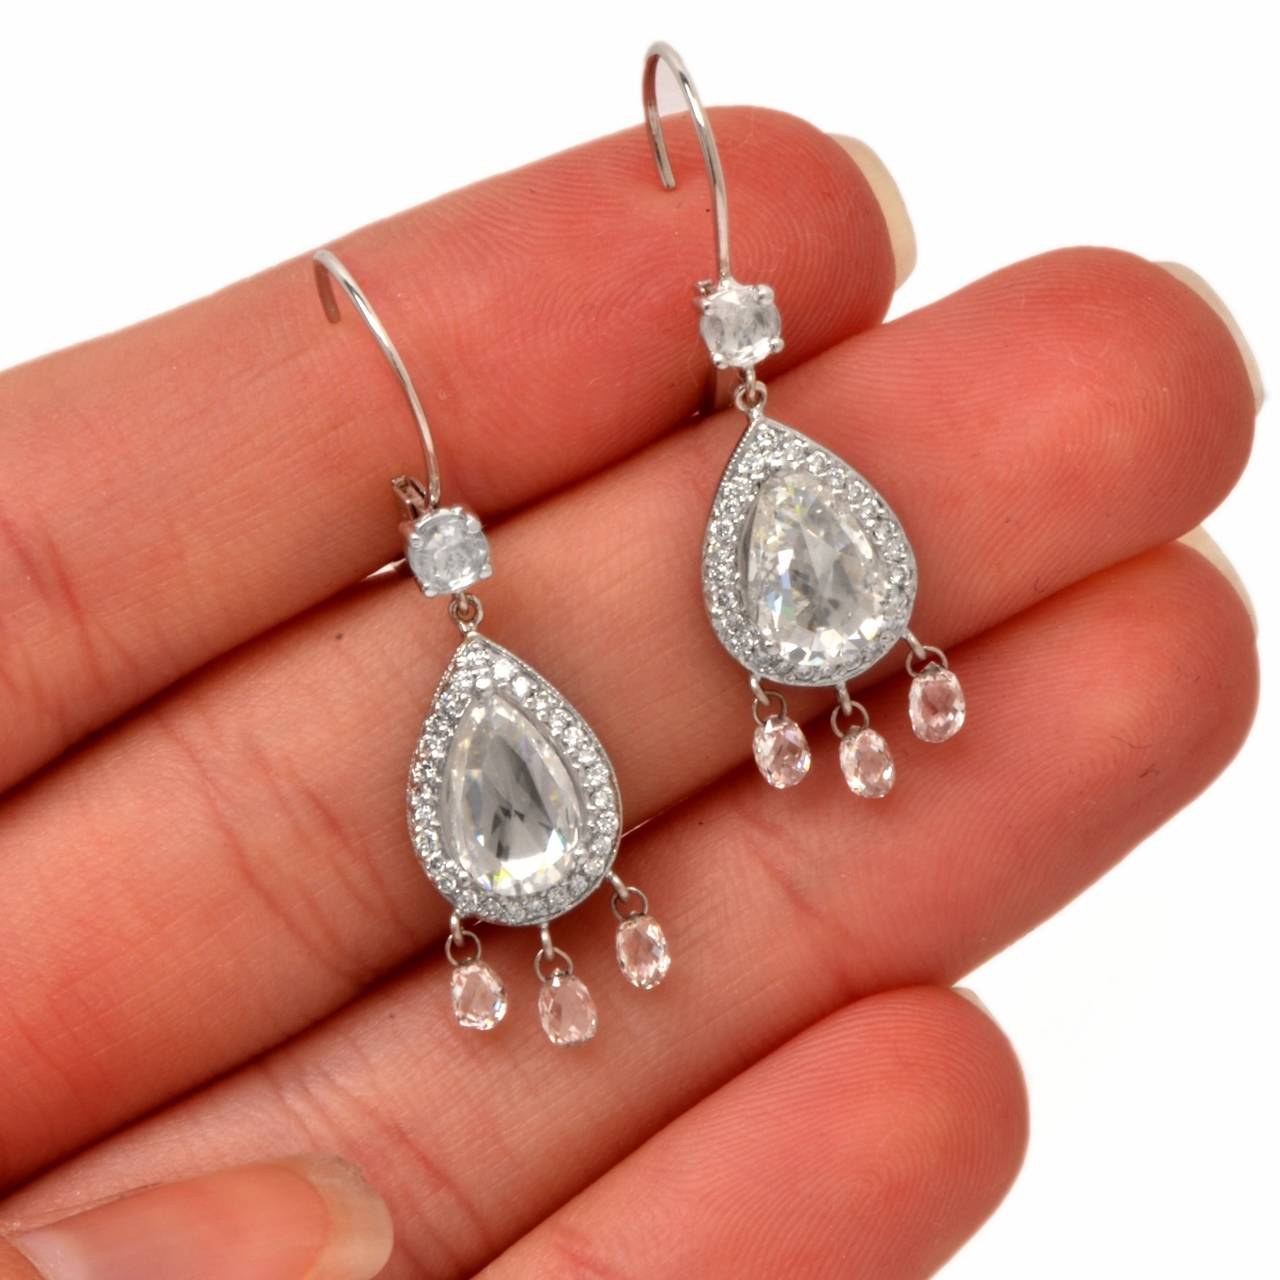 These aesthetically enchanting antique design pendant earrings with Pear-shape and round-faceted diamonds are crafted in solid 18K white gold, weighing 6.00 grams and measuring 1.3